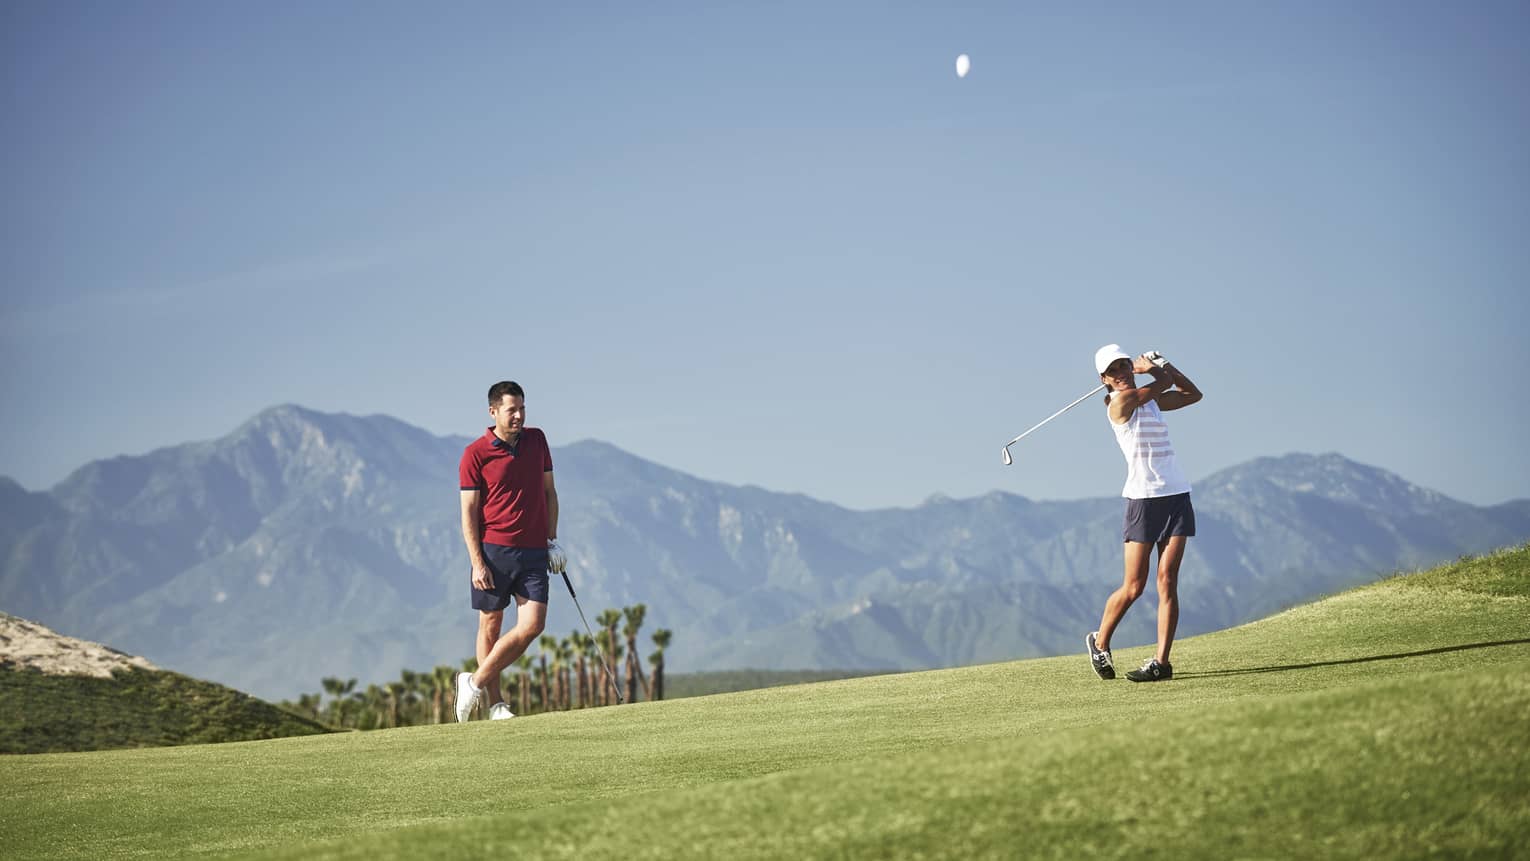 A golfer leans on their club observing another's swing on a picturesque golf course silhouetted by a mountain range.